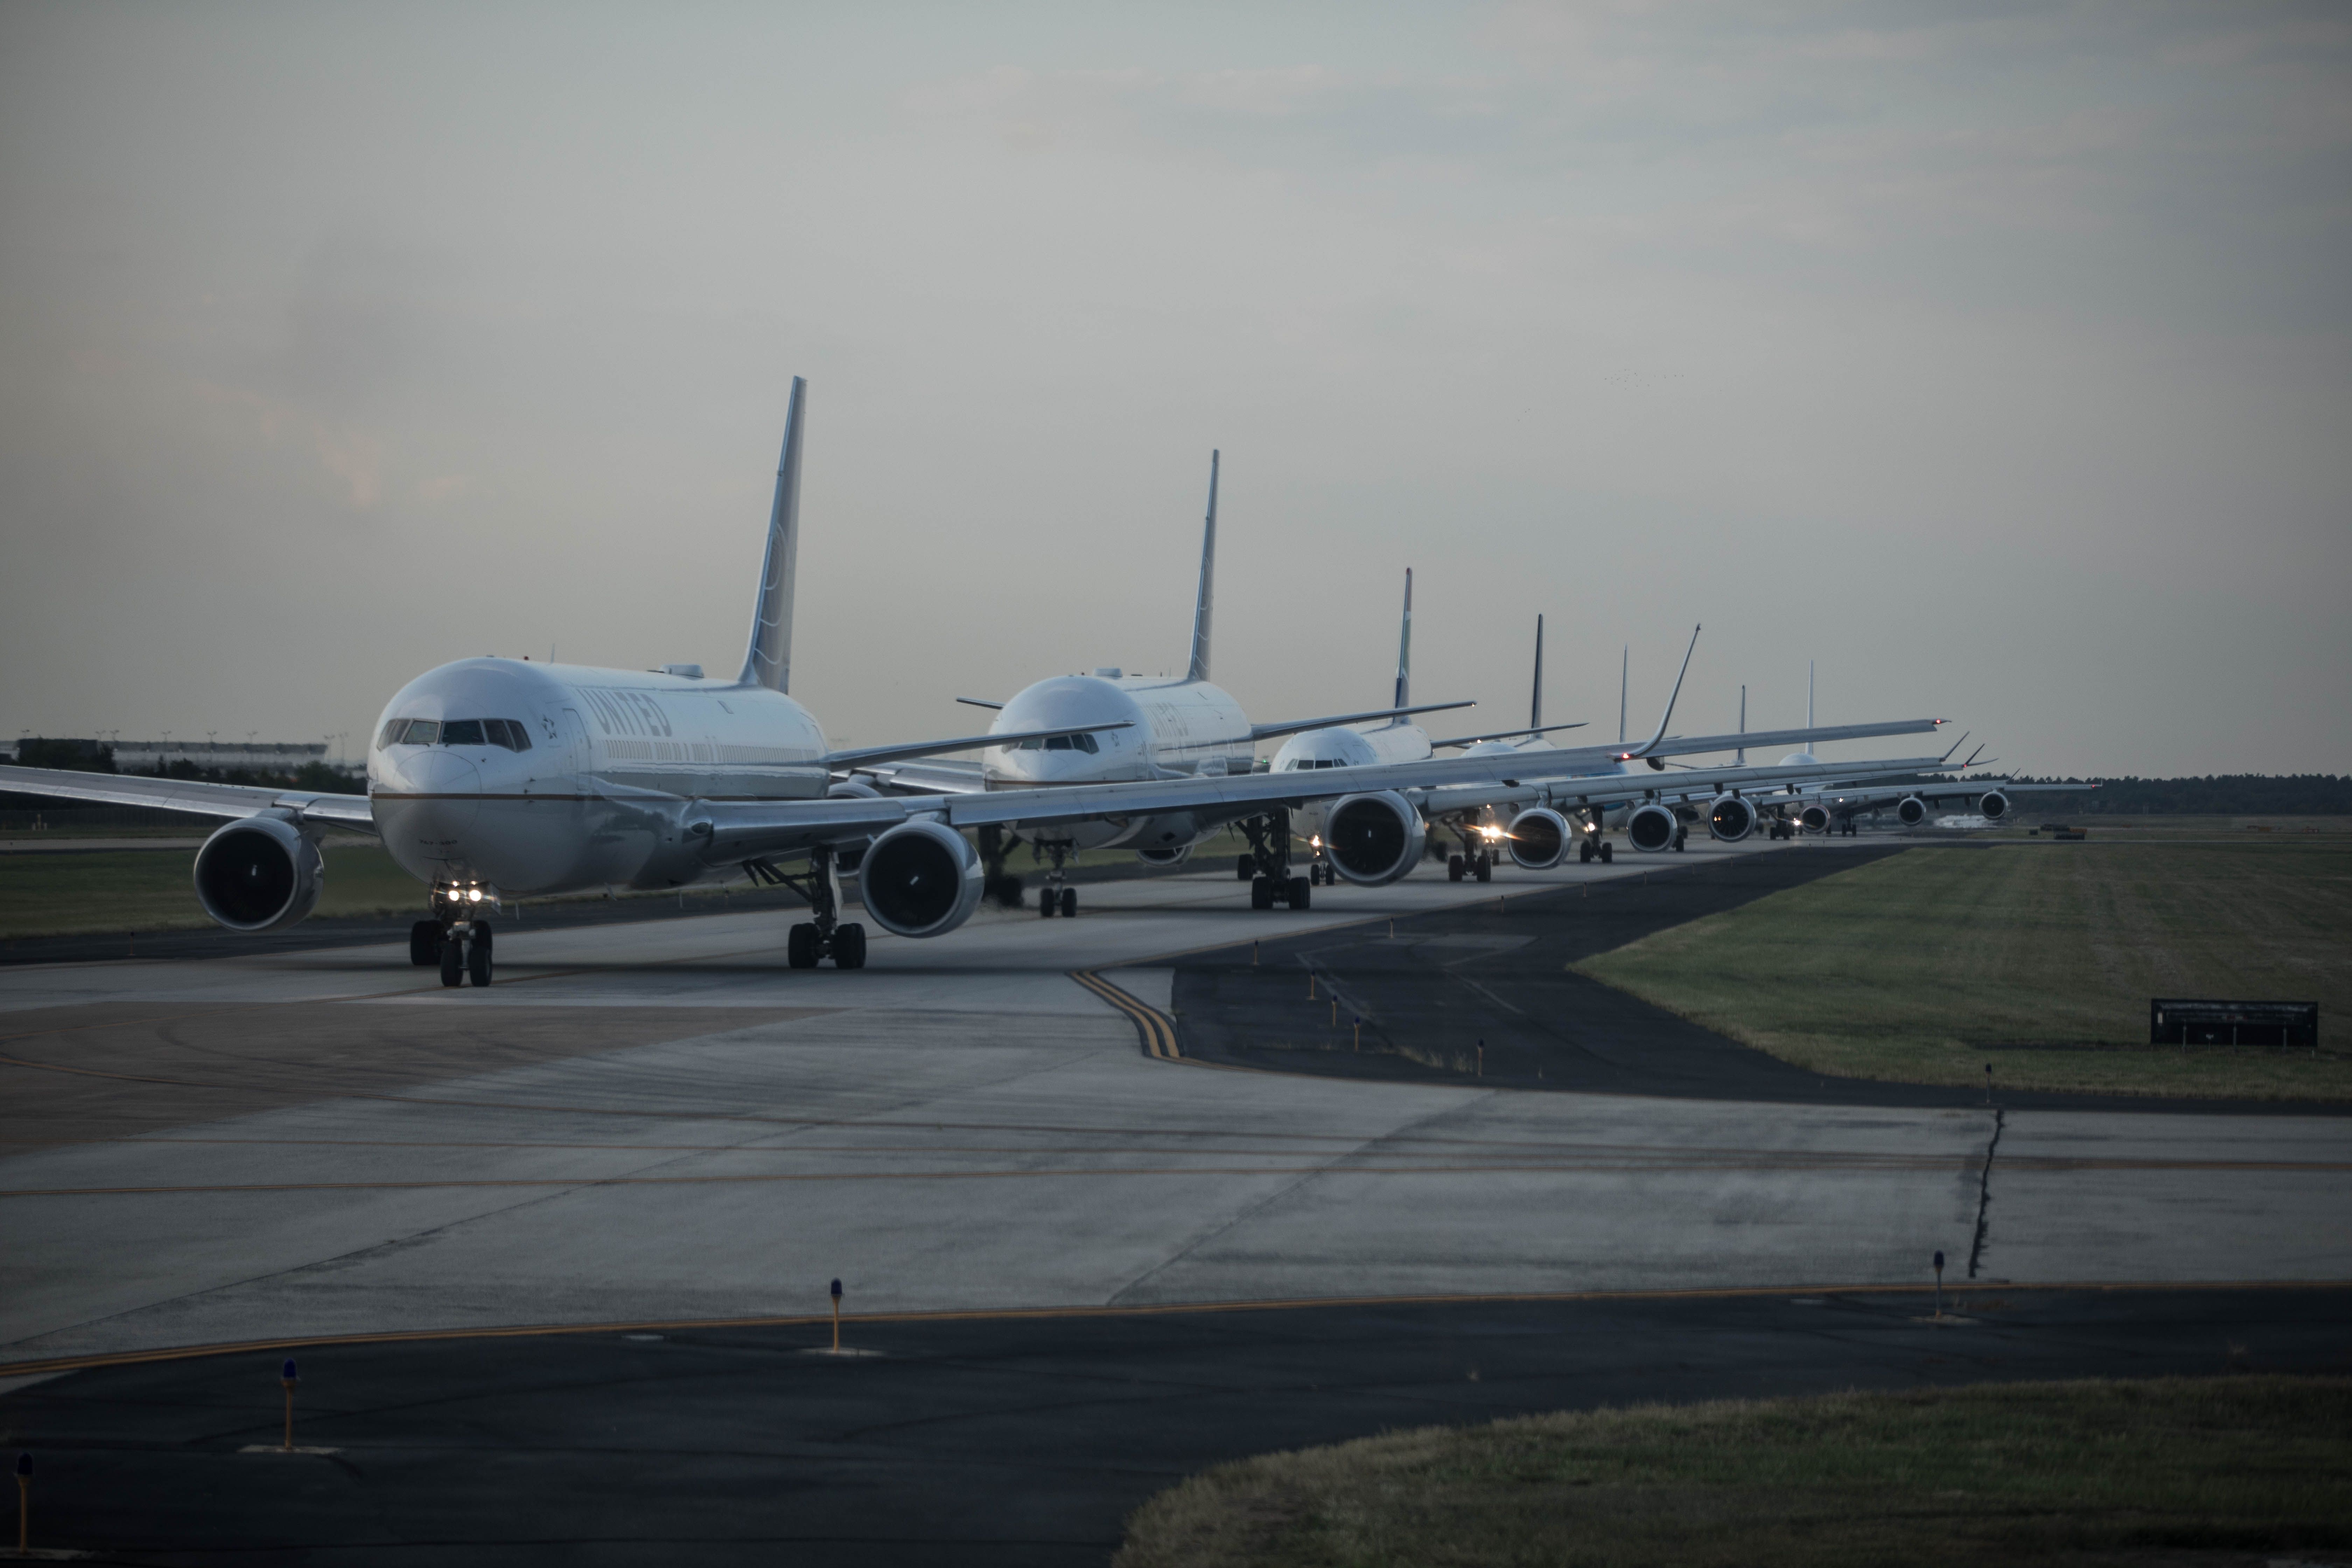 A number of planes, including United Airlines planes, lining up for the runway on Washington Dulles International Airport (IAD).